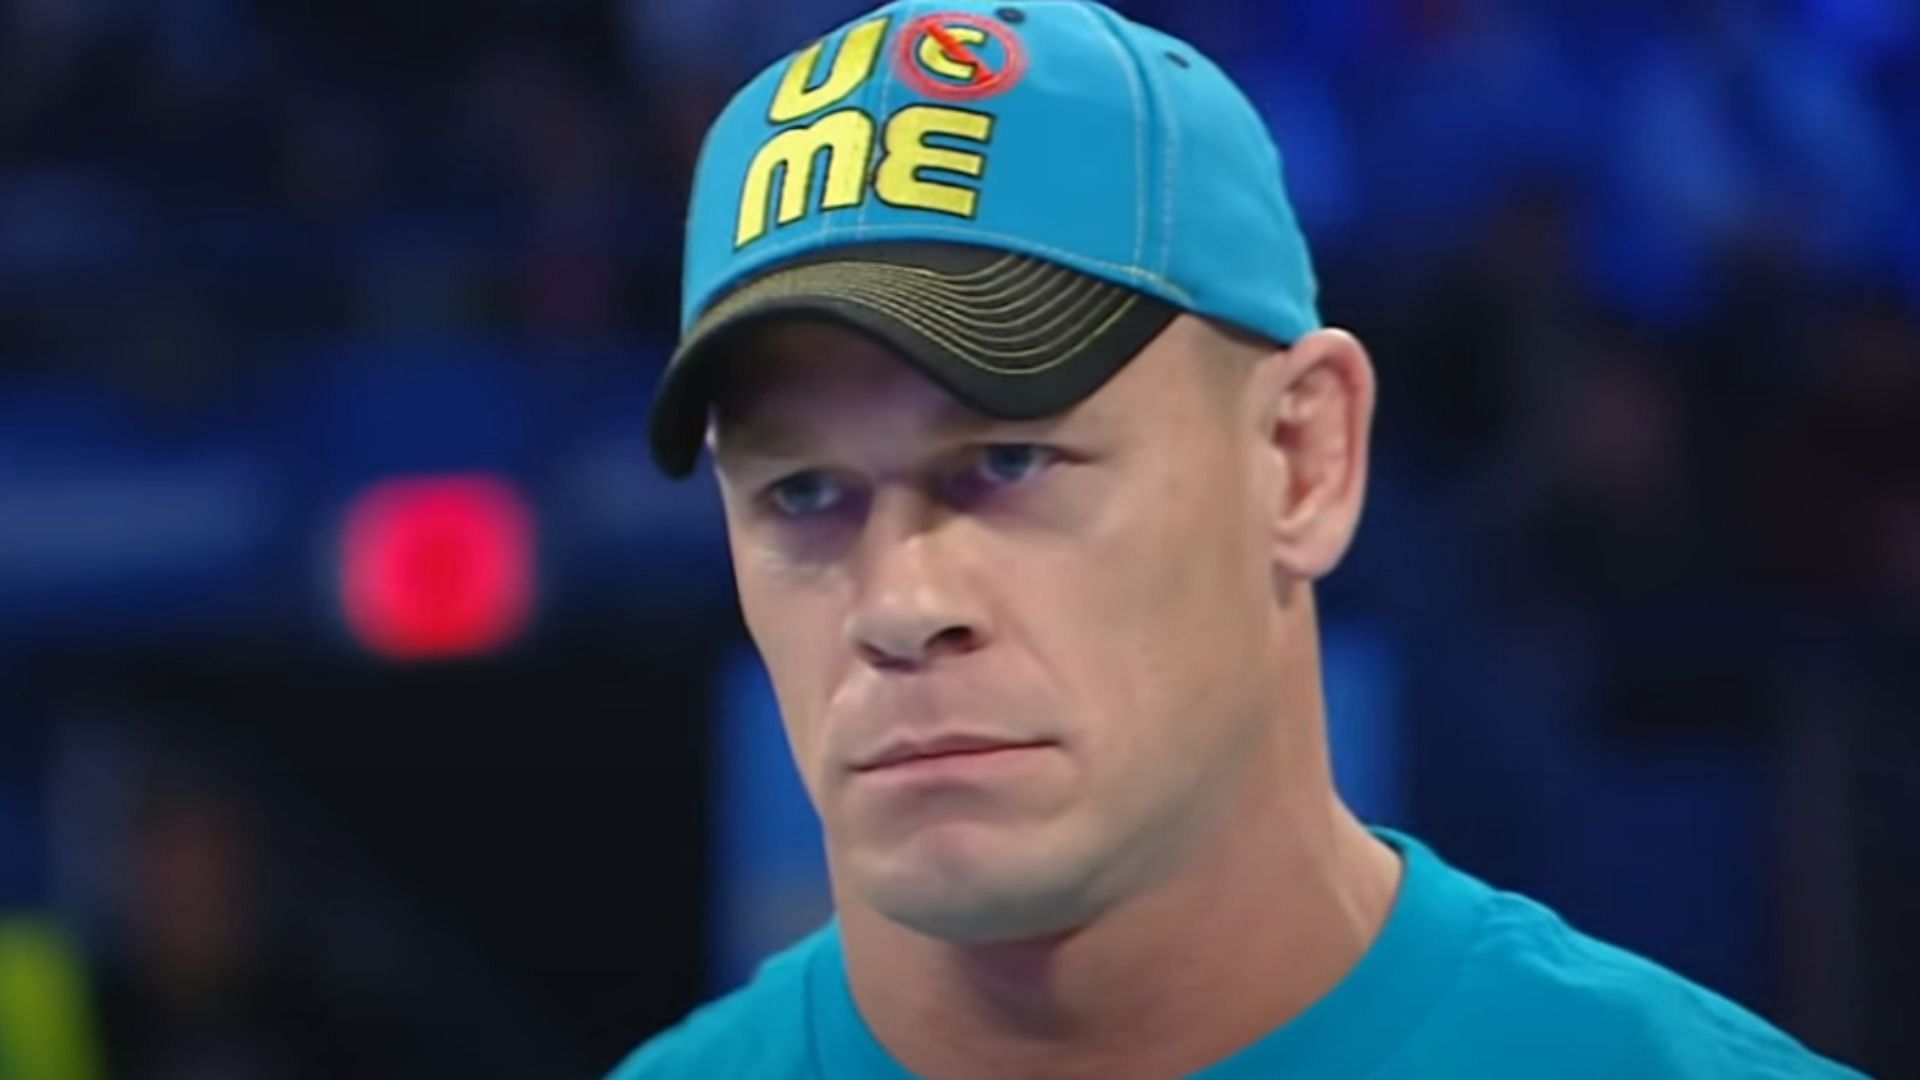 John Cena is widely viewed as one of WWE